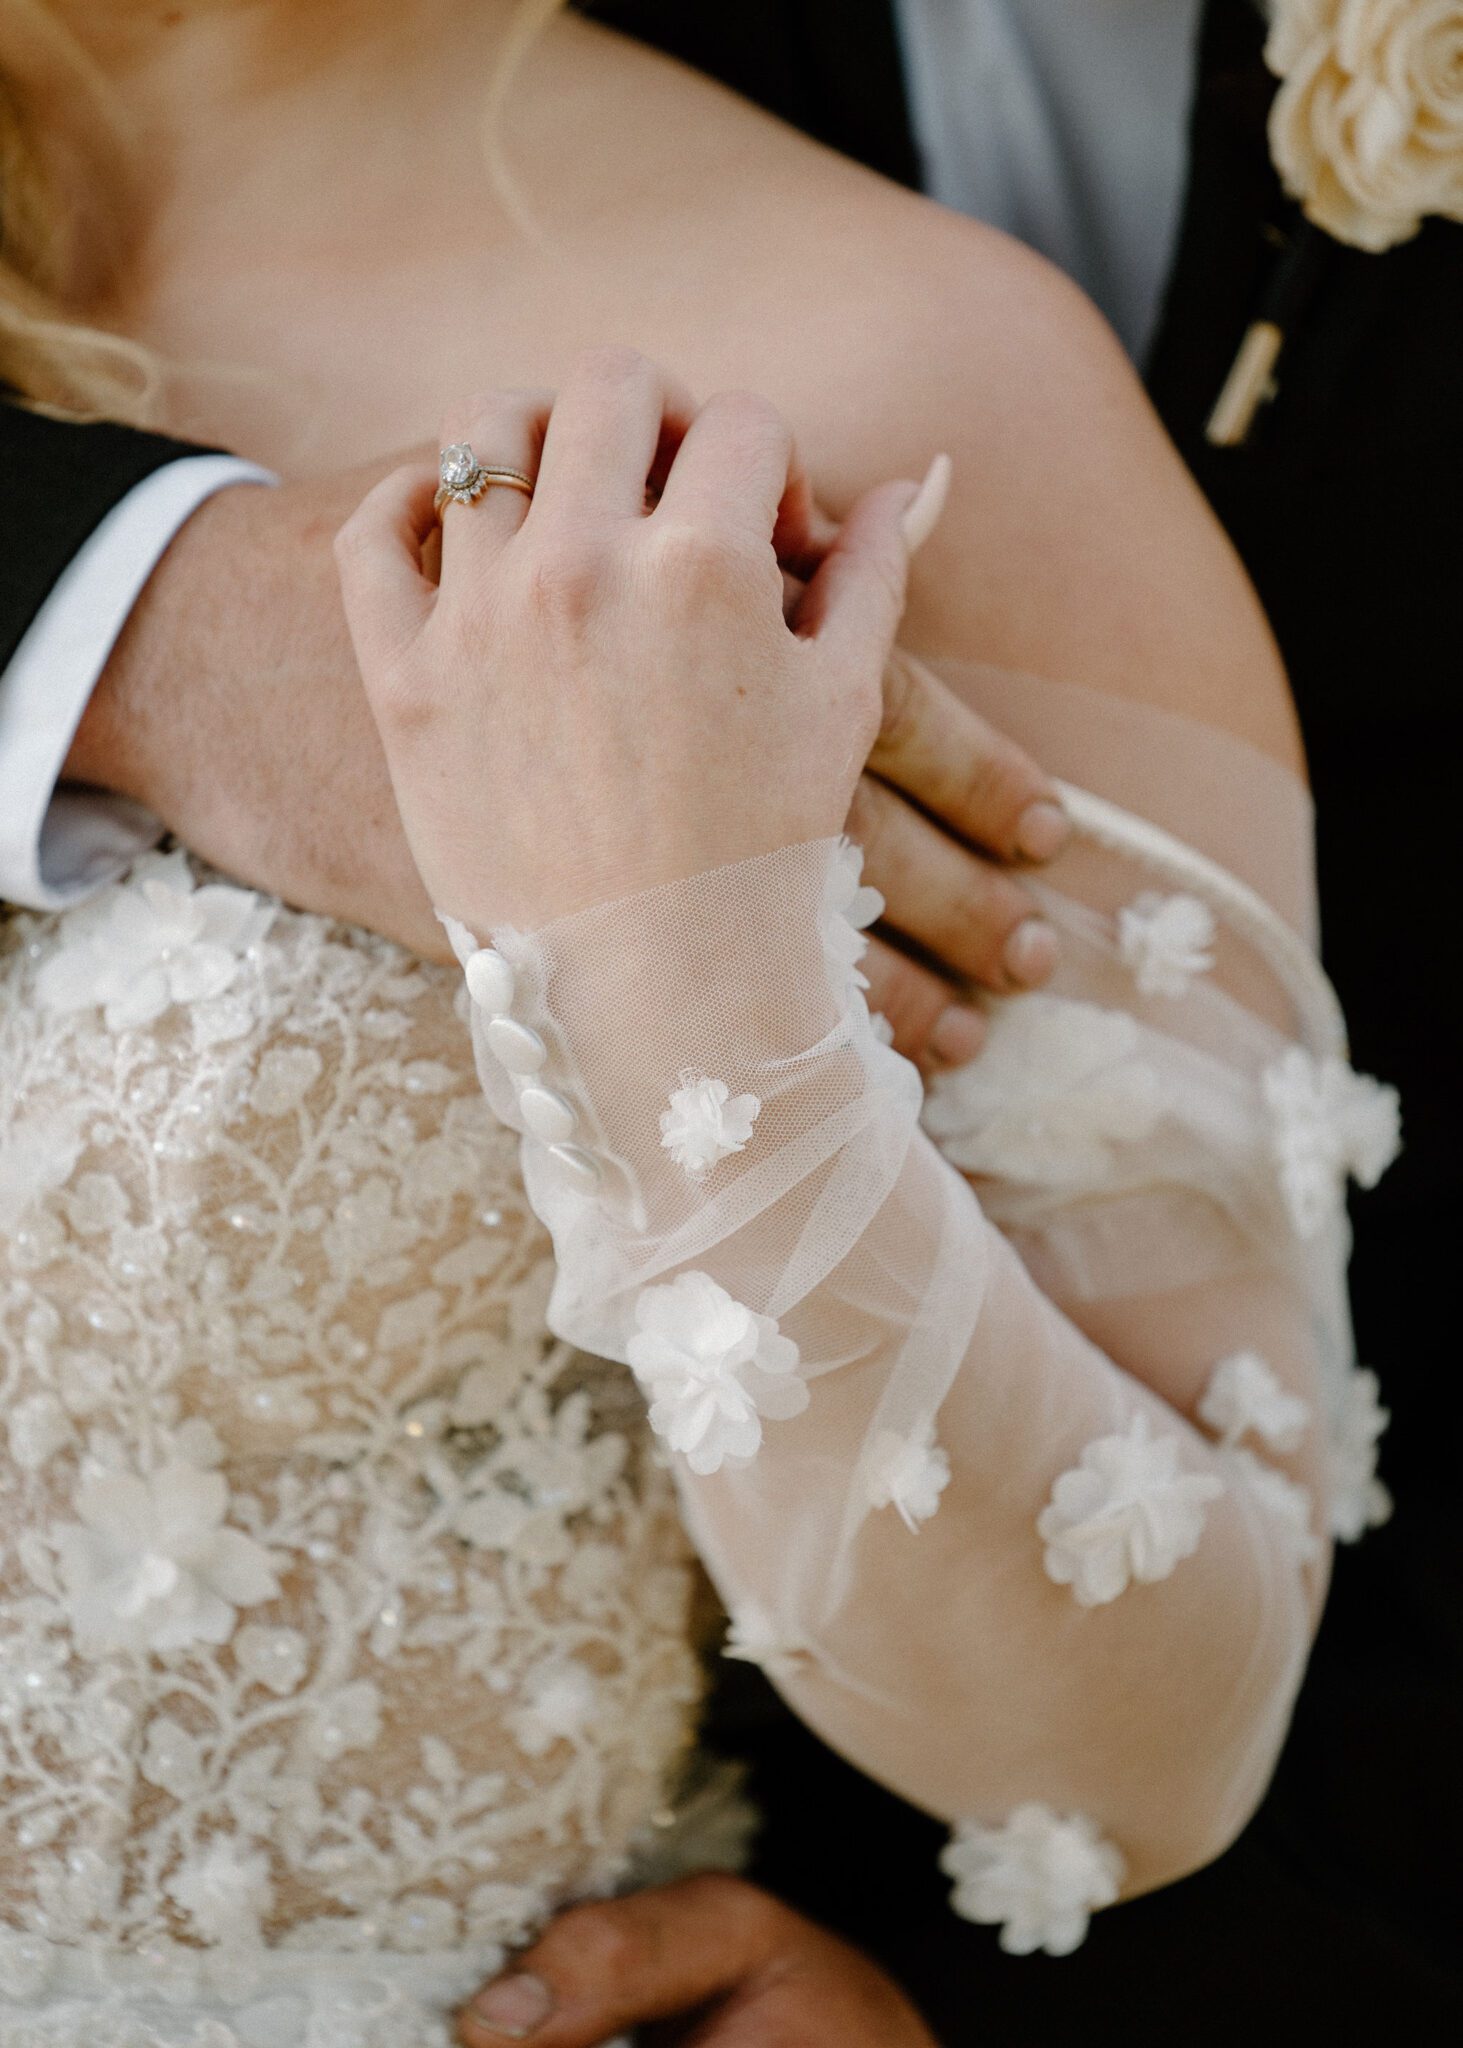 Close up, intimate portrait of groom embracing his bride, detailed photo of bride's ring and floral-detailed tulle gown, warm and moody wedding inspiration.